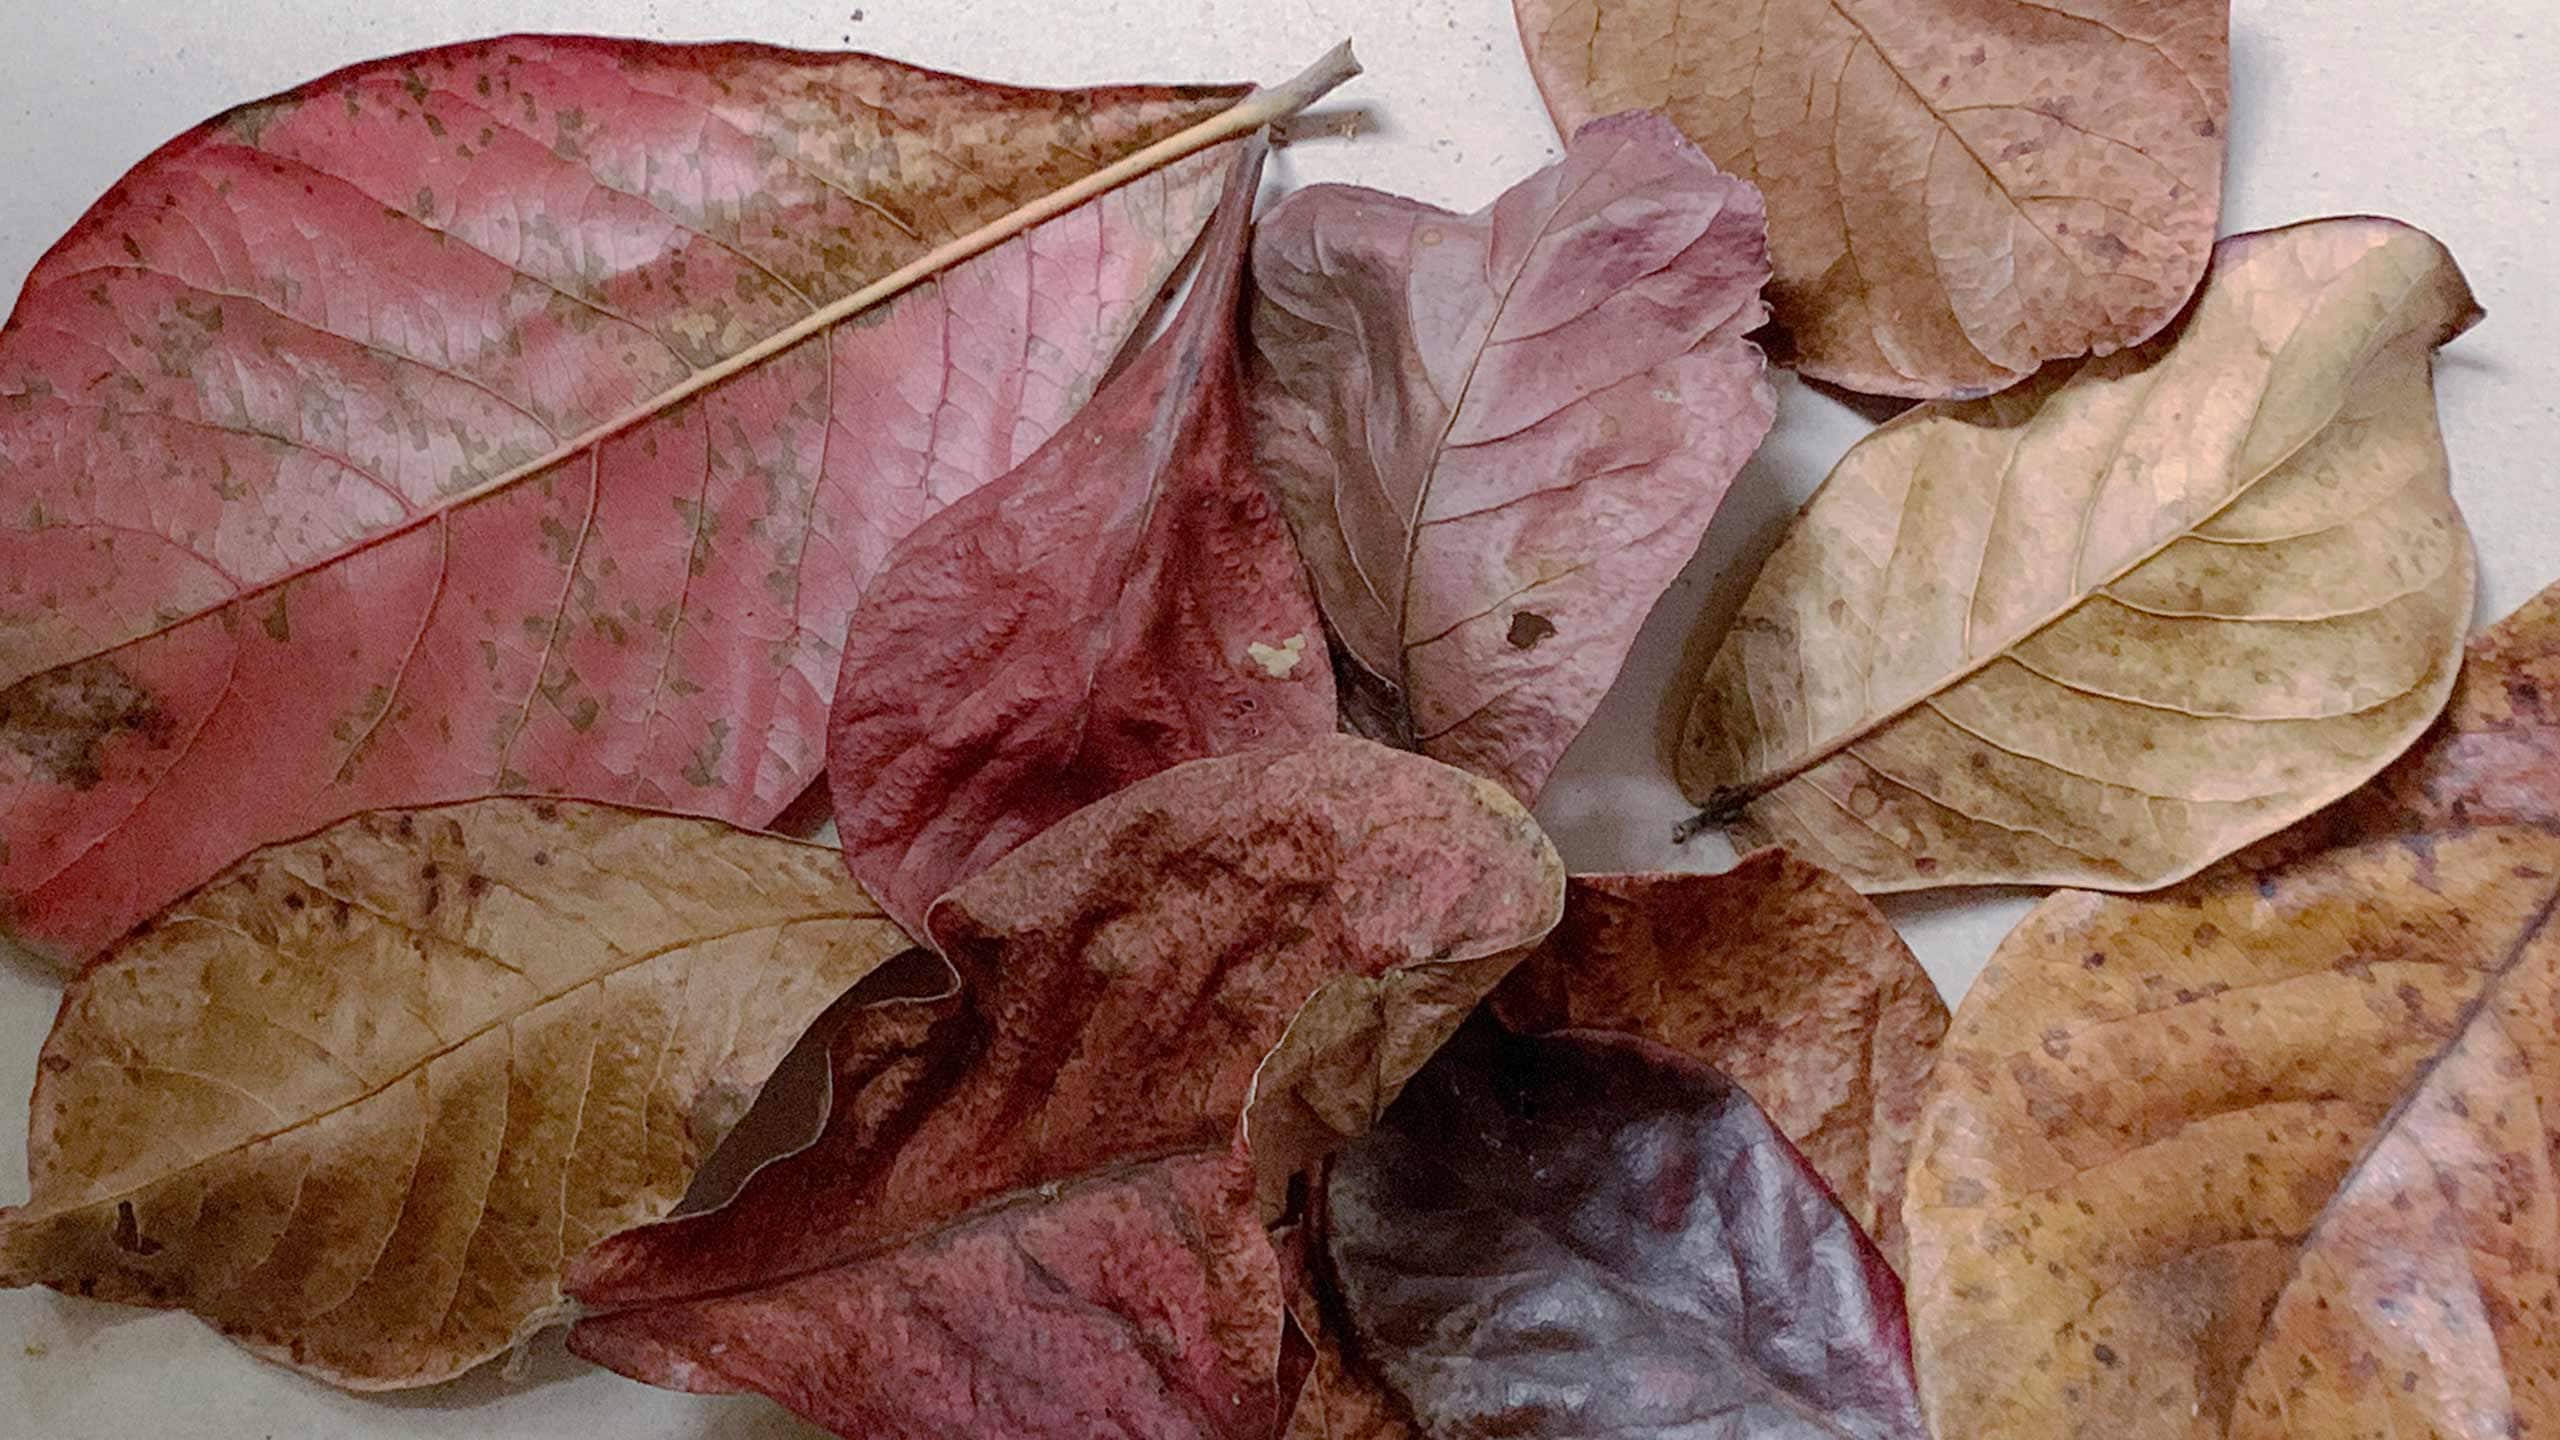 Dried Autumn maple leaves in various shades of brown and red.